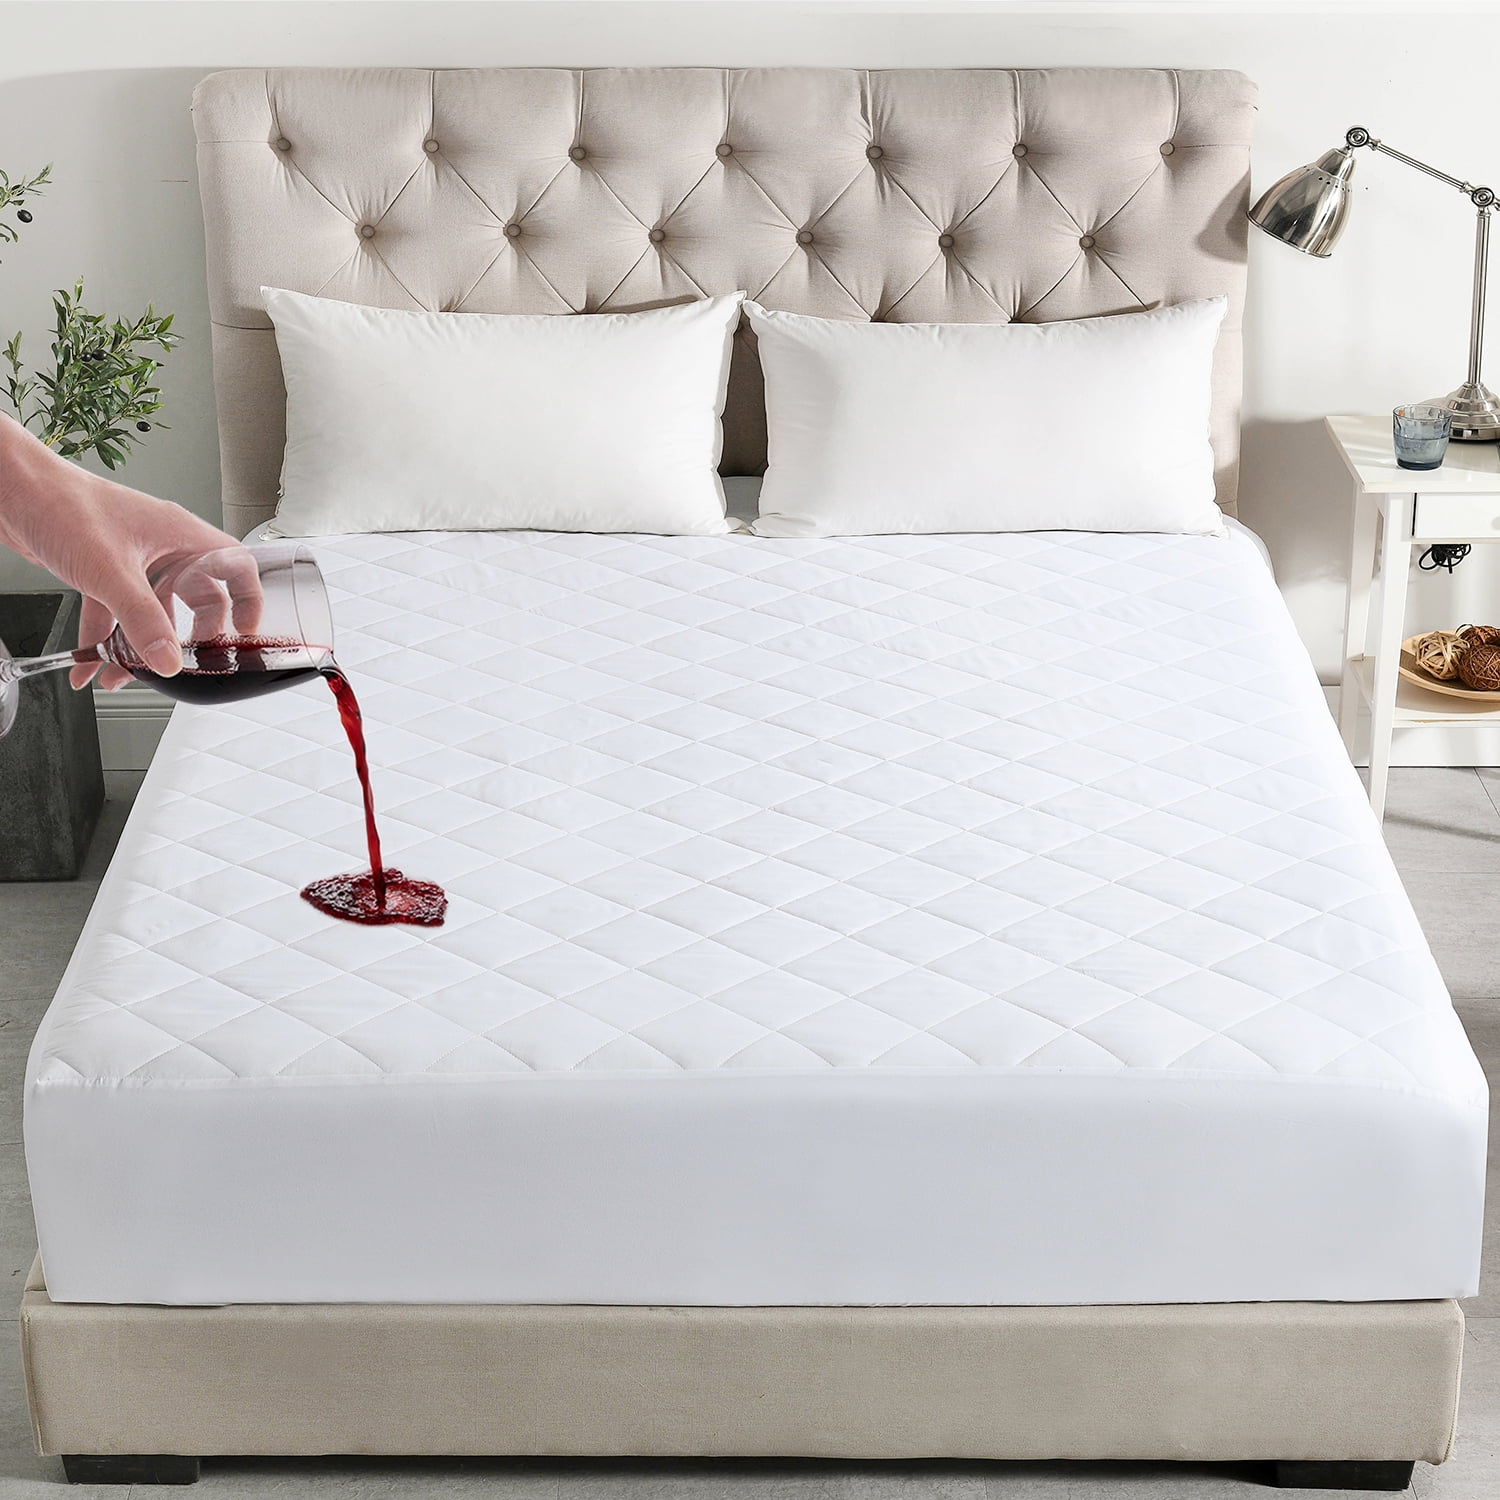 Elastic sides Waterproof Mattress Protector Cover Breathable 